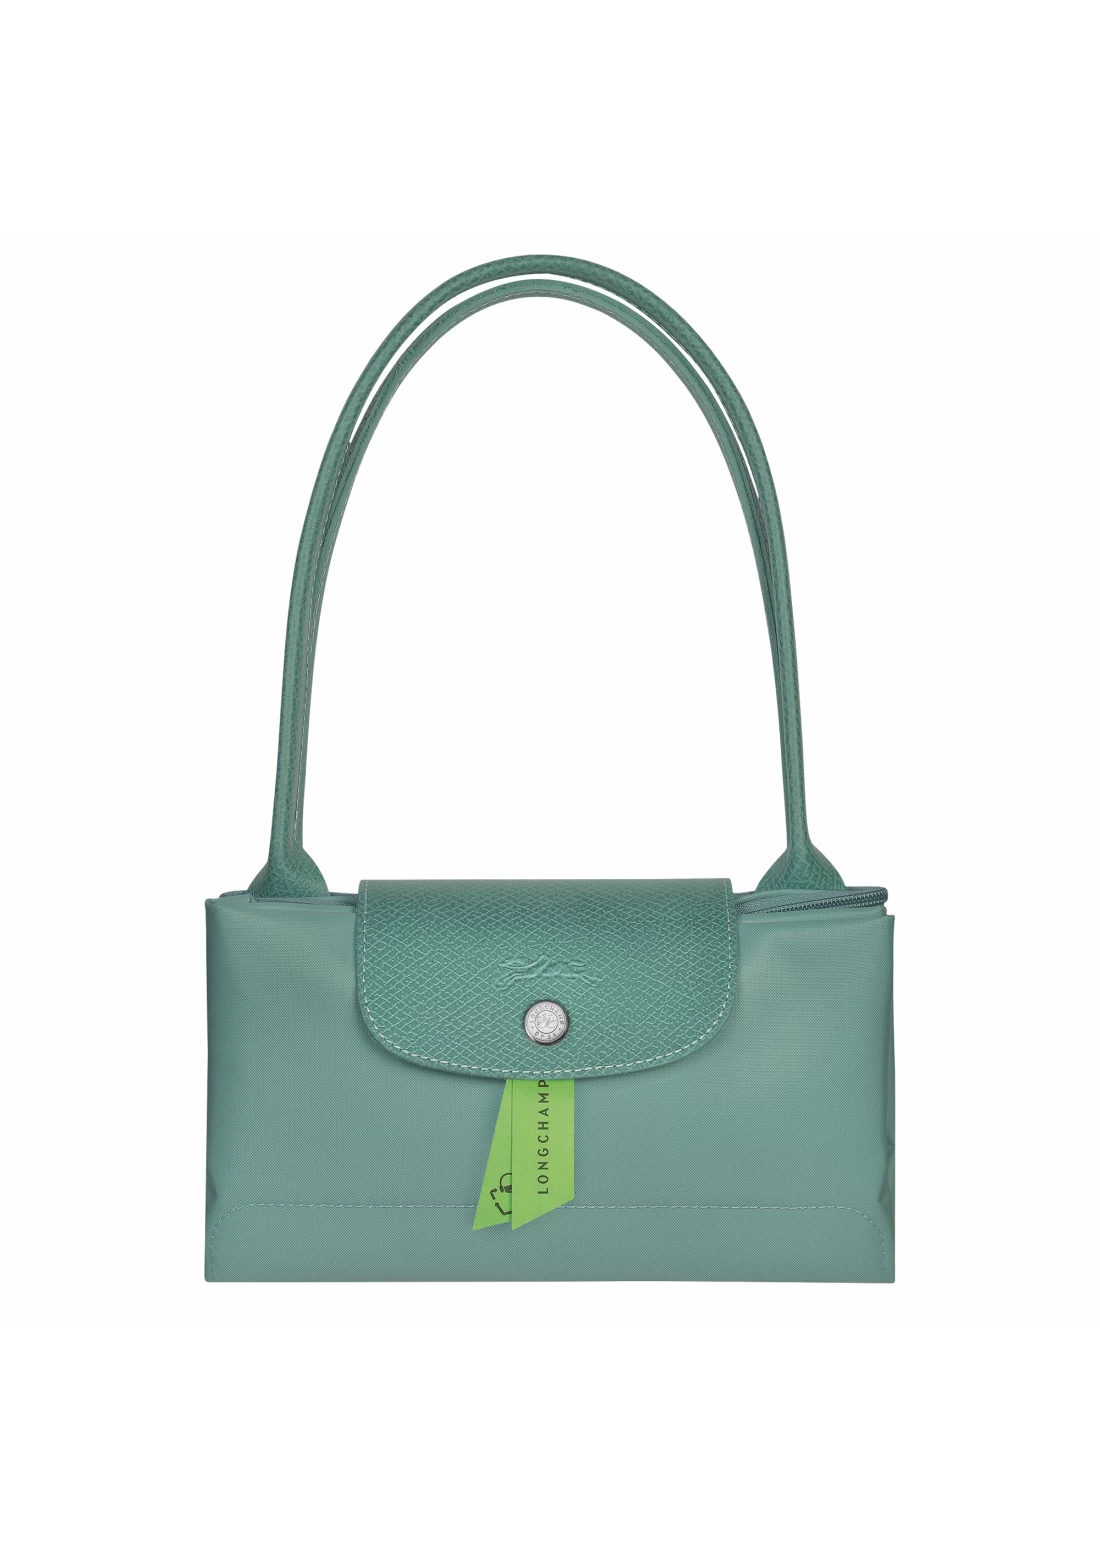 Longchamp Lagoon Top-Handle Le Pliage Pouch, Best Price and Reviews